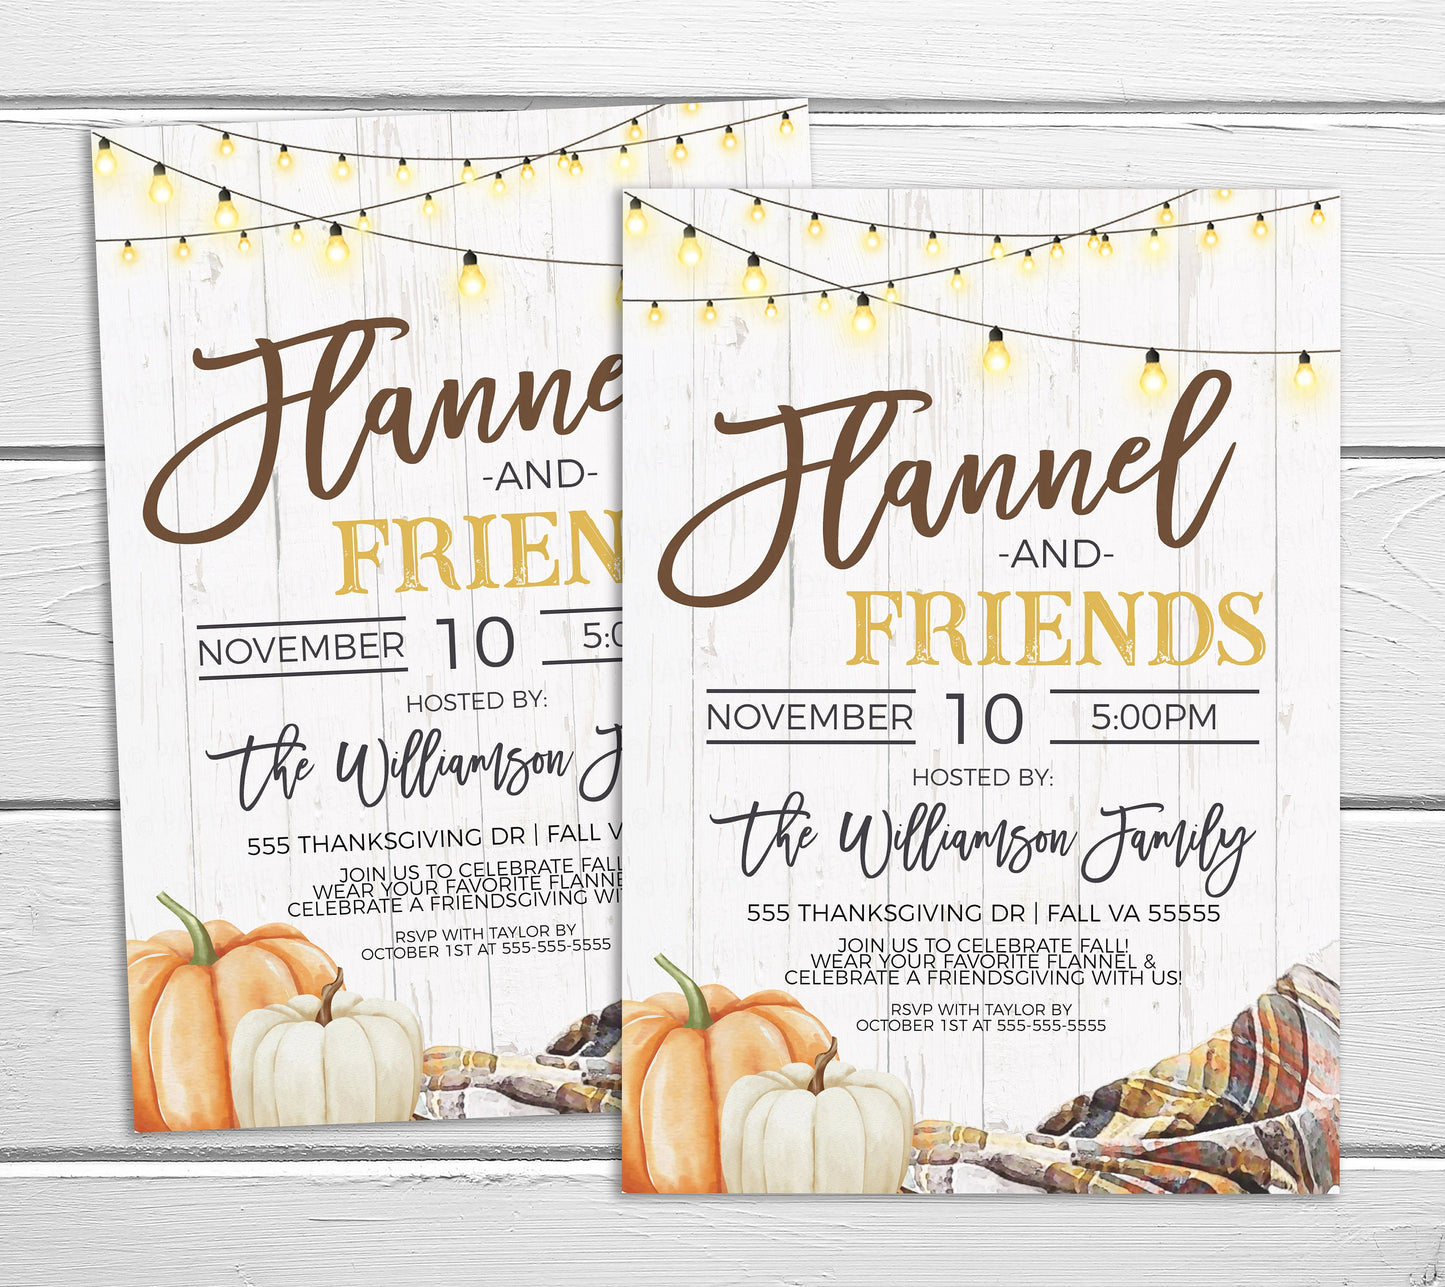 Friendsgiving Invitation, Flannel And Friends Party Invite, Fall Friends Thanksgiving, Dinner Brunch Lunch, Editable Printable Template